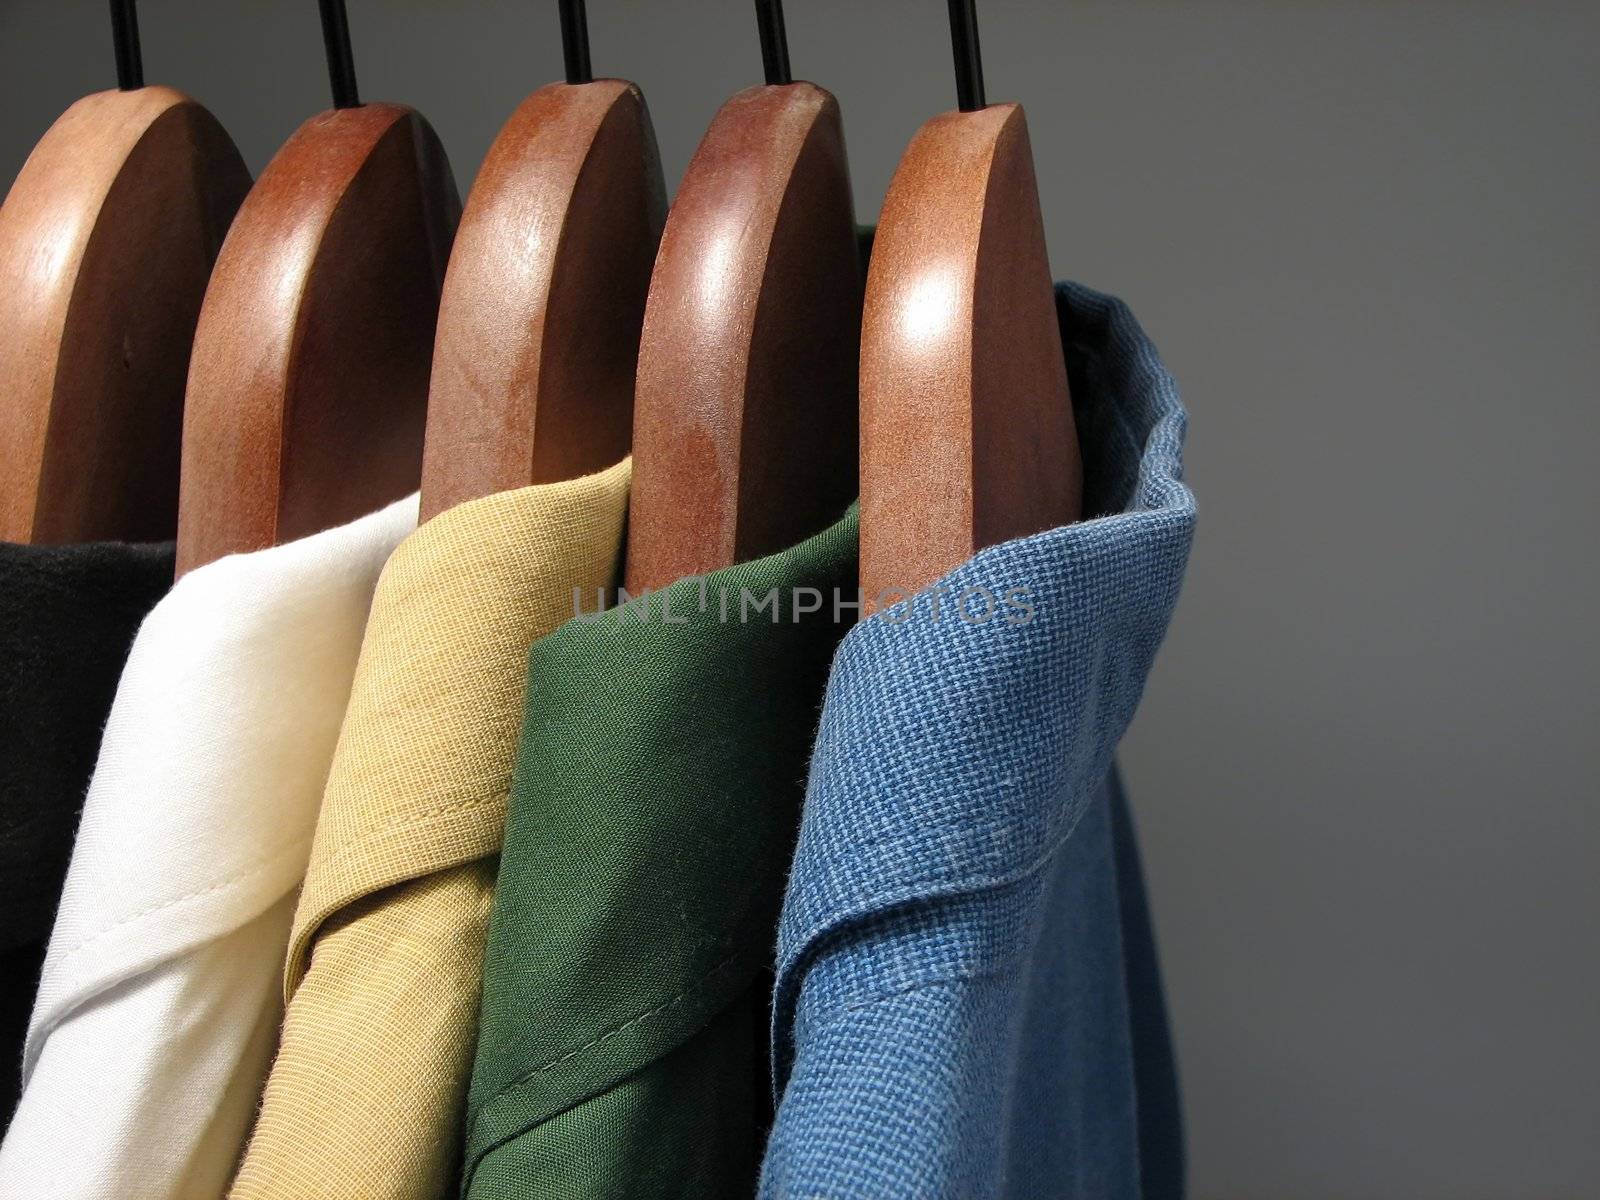 Shirts of different colors on wooden hangers in a closet.